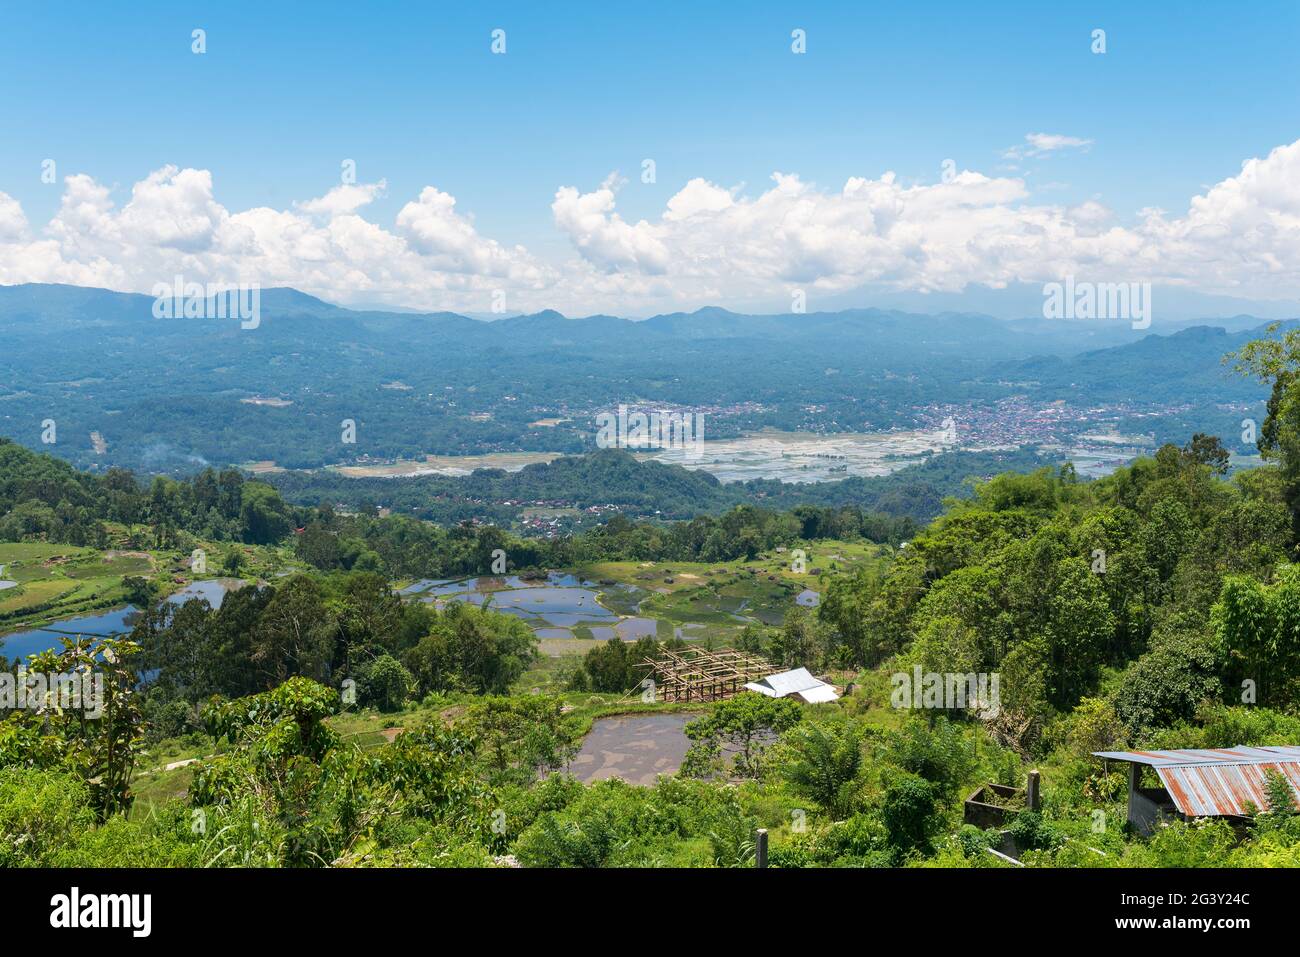 View from the mountains over rice fields to Rantepao in Tana Toraja Stock Photo